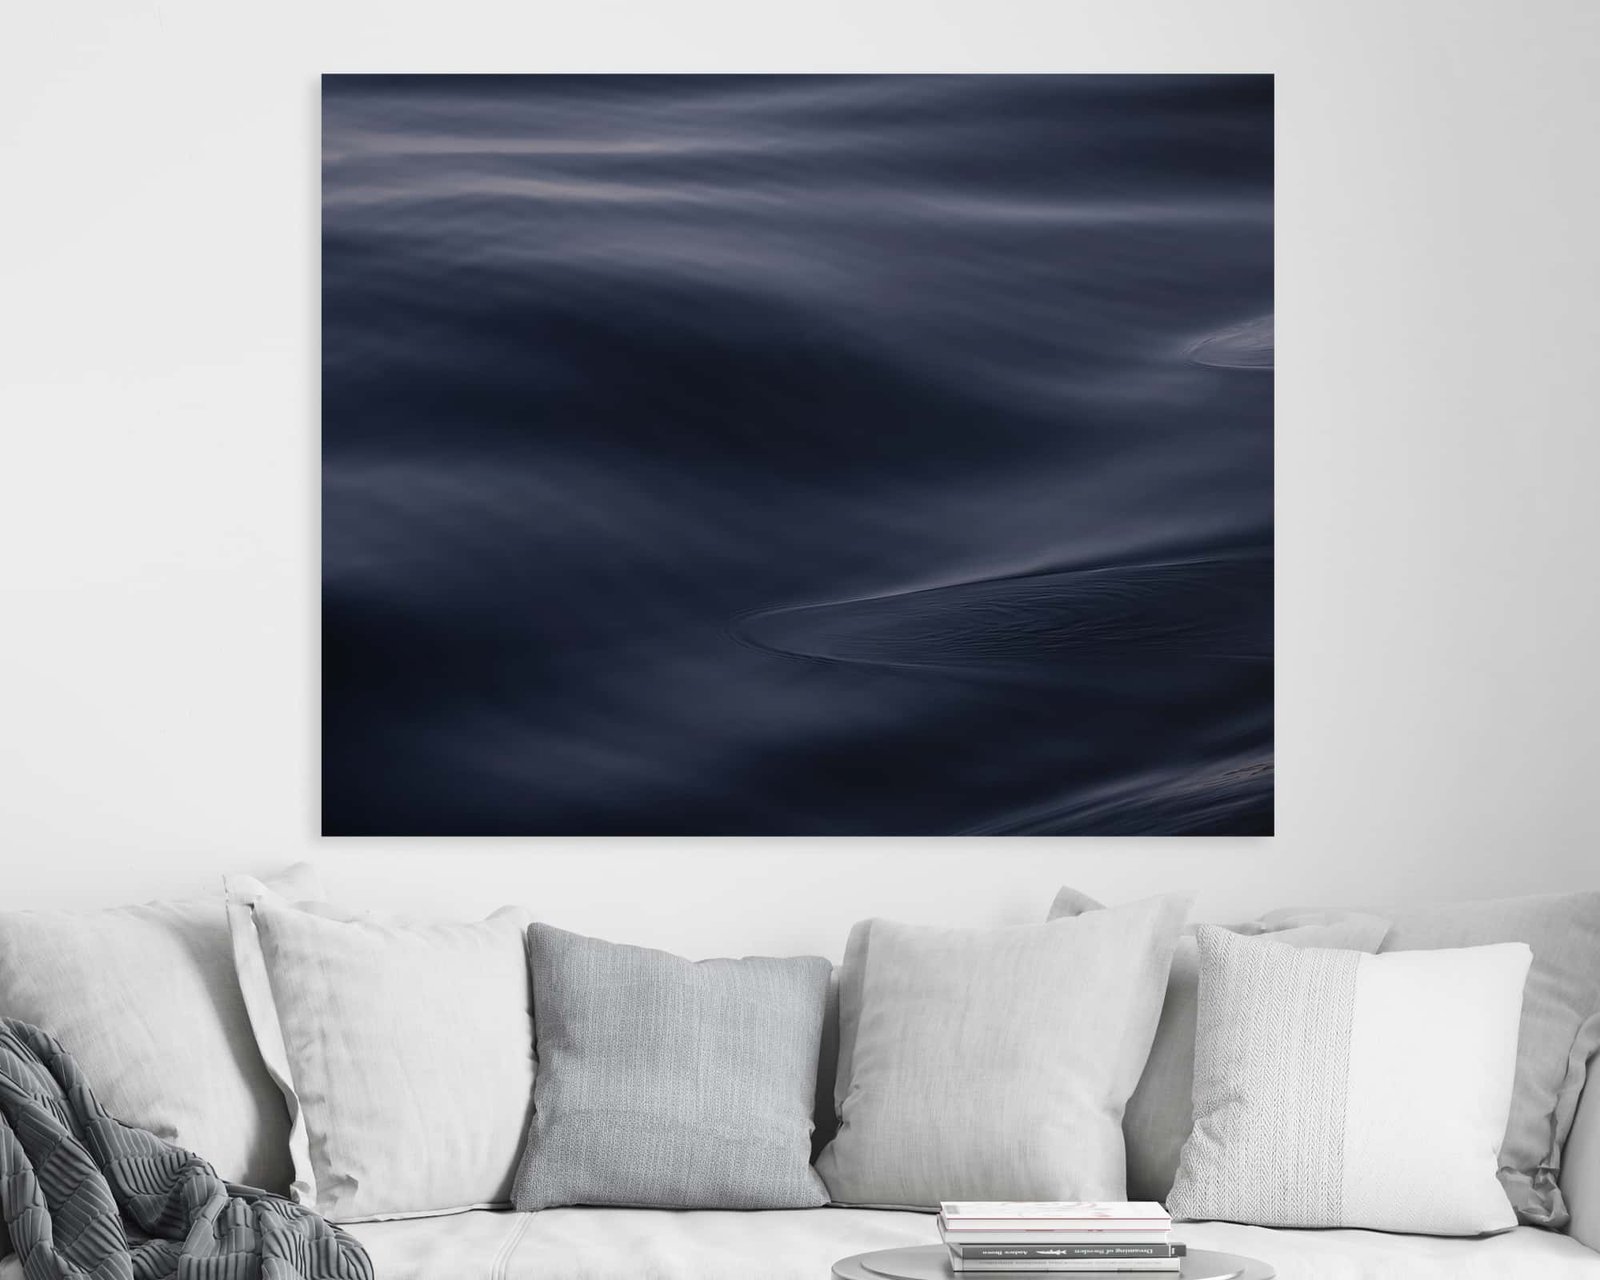 Photograph of sea texture hanging at a home